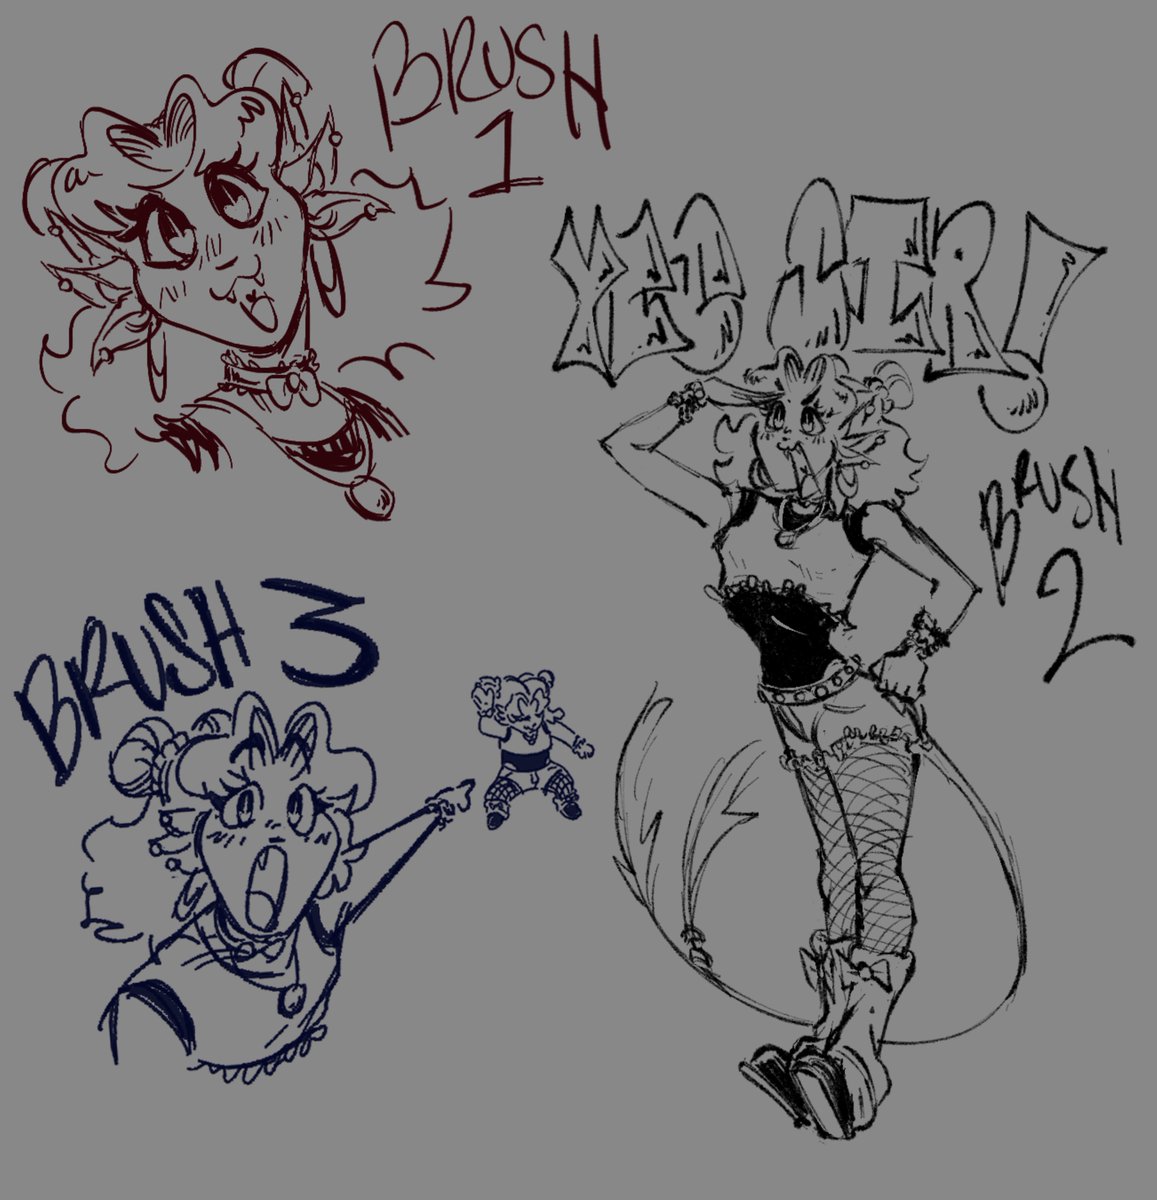 Doing silly little doodle page c0mz!!!
More details in the desc!!! 
-
-
#vtm #vampire